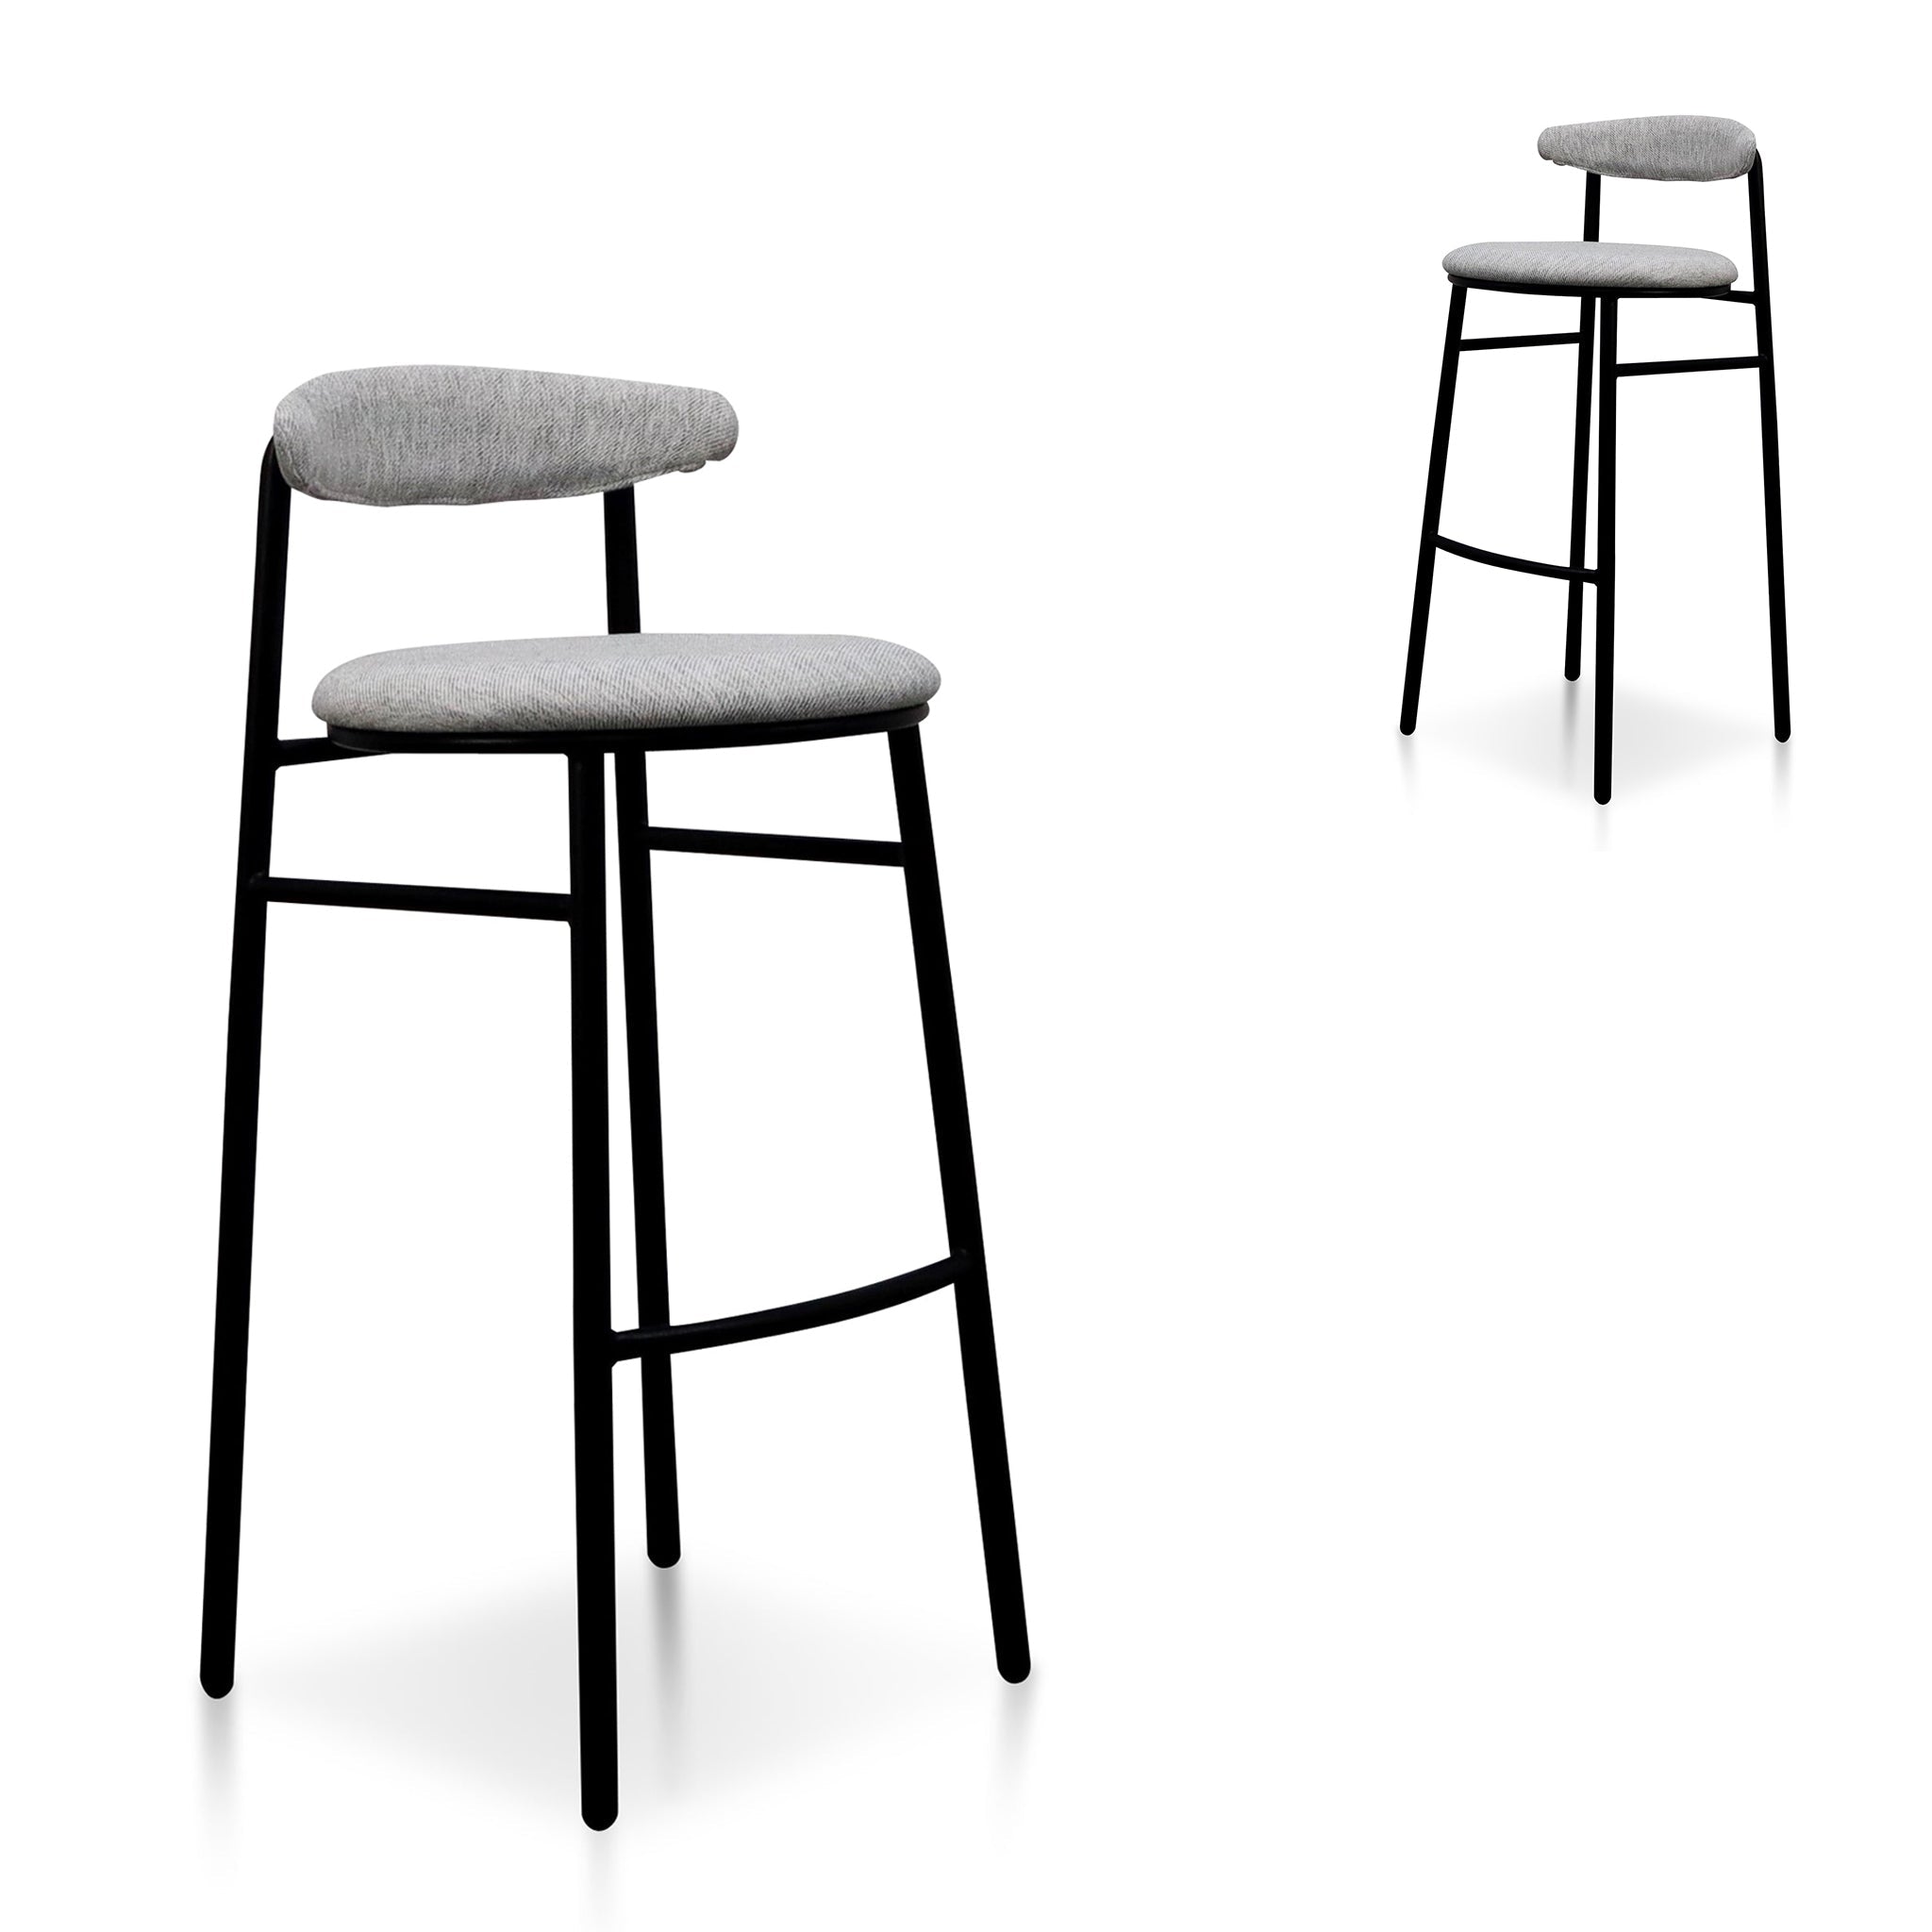 Oneal 65cm Fabric Bar Stool - Silver Grey and Black Legs (Set of 2)